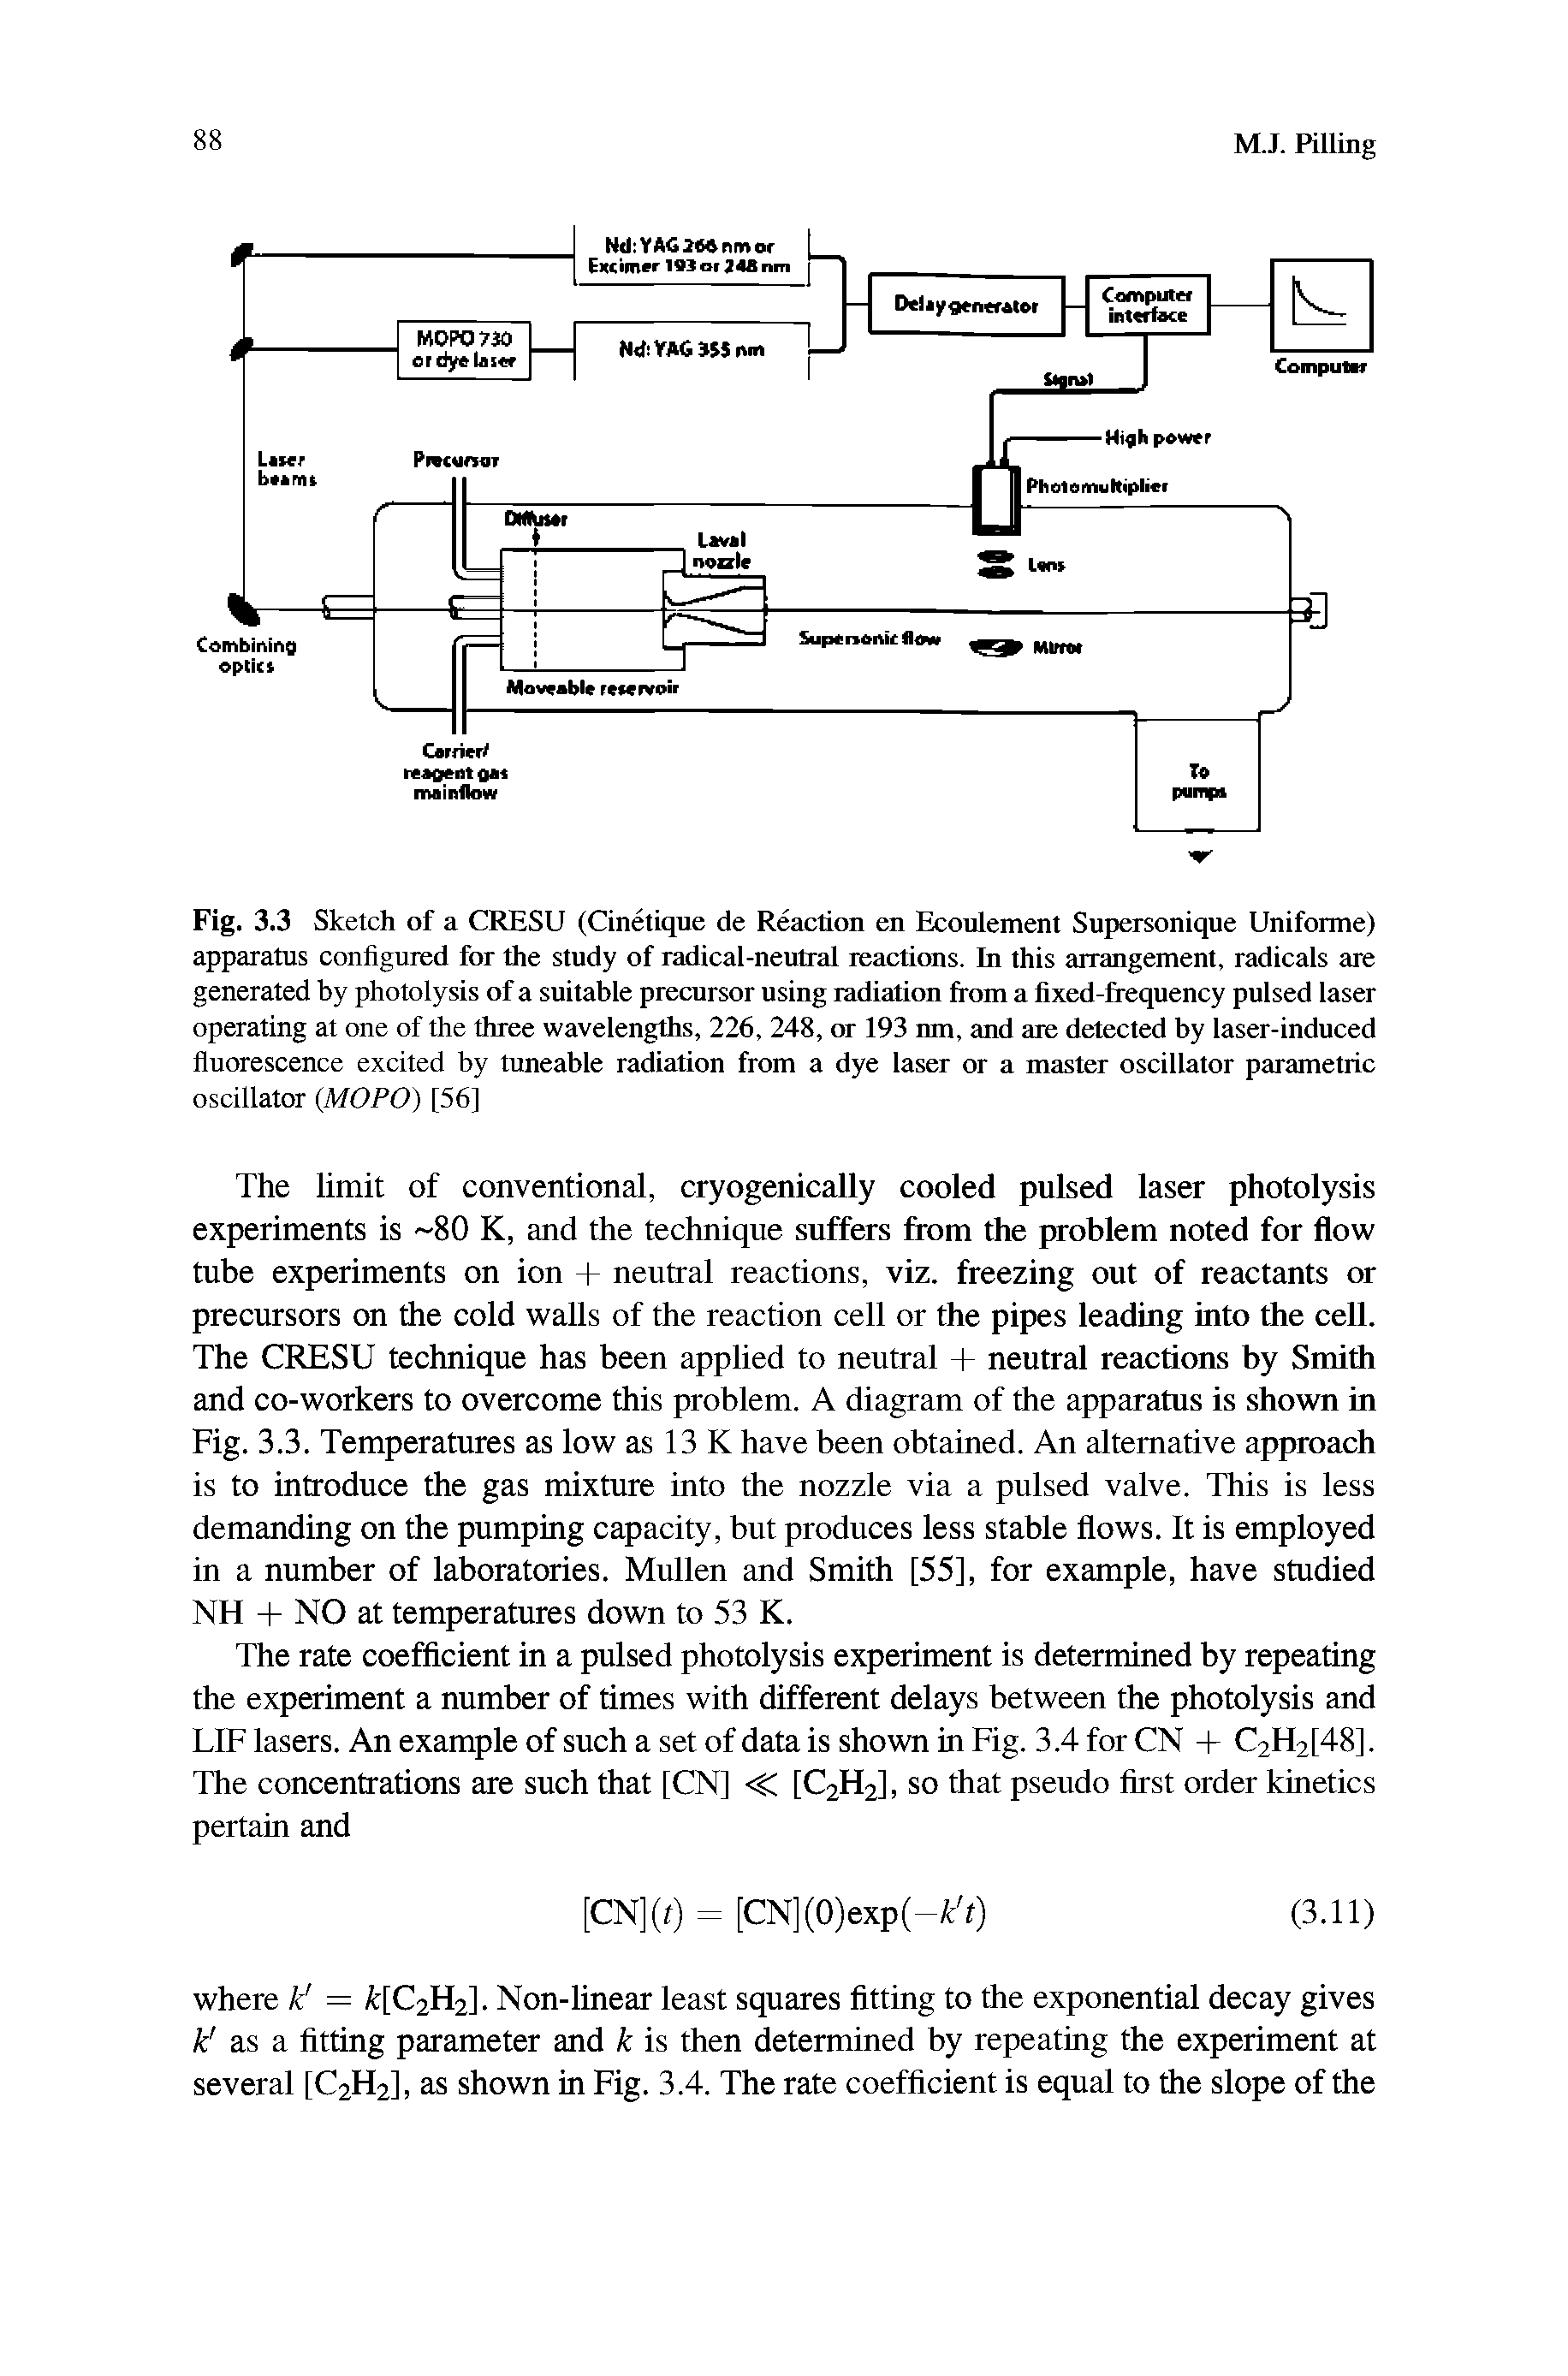 Fig. 3.3 Sketch of a CRESU (Cinetique de Reaction en Ecoulement Supersonique Uniforme) apparatus configured for the study of radical-neutral reactions. In this arrangement, radicals are generated by photolysis of a suitable precursor using radiation from a fixed-frequency pulsed laser operating at one of the three wavelengths, 226, 248, or 193 nm, and are detected by laser-induced fluorescence excited by tuneable radiation from a dye laser or a master oscillator parametric oscillator (MOPO) [56]...